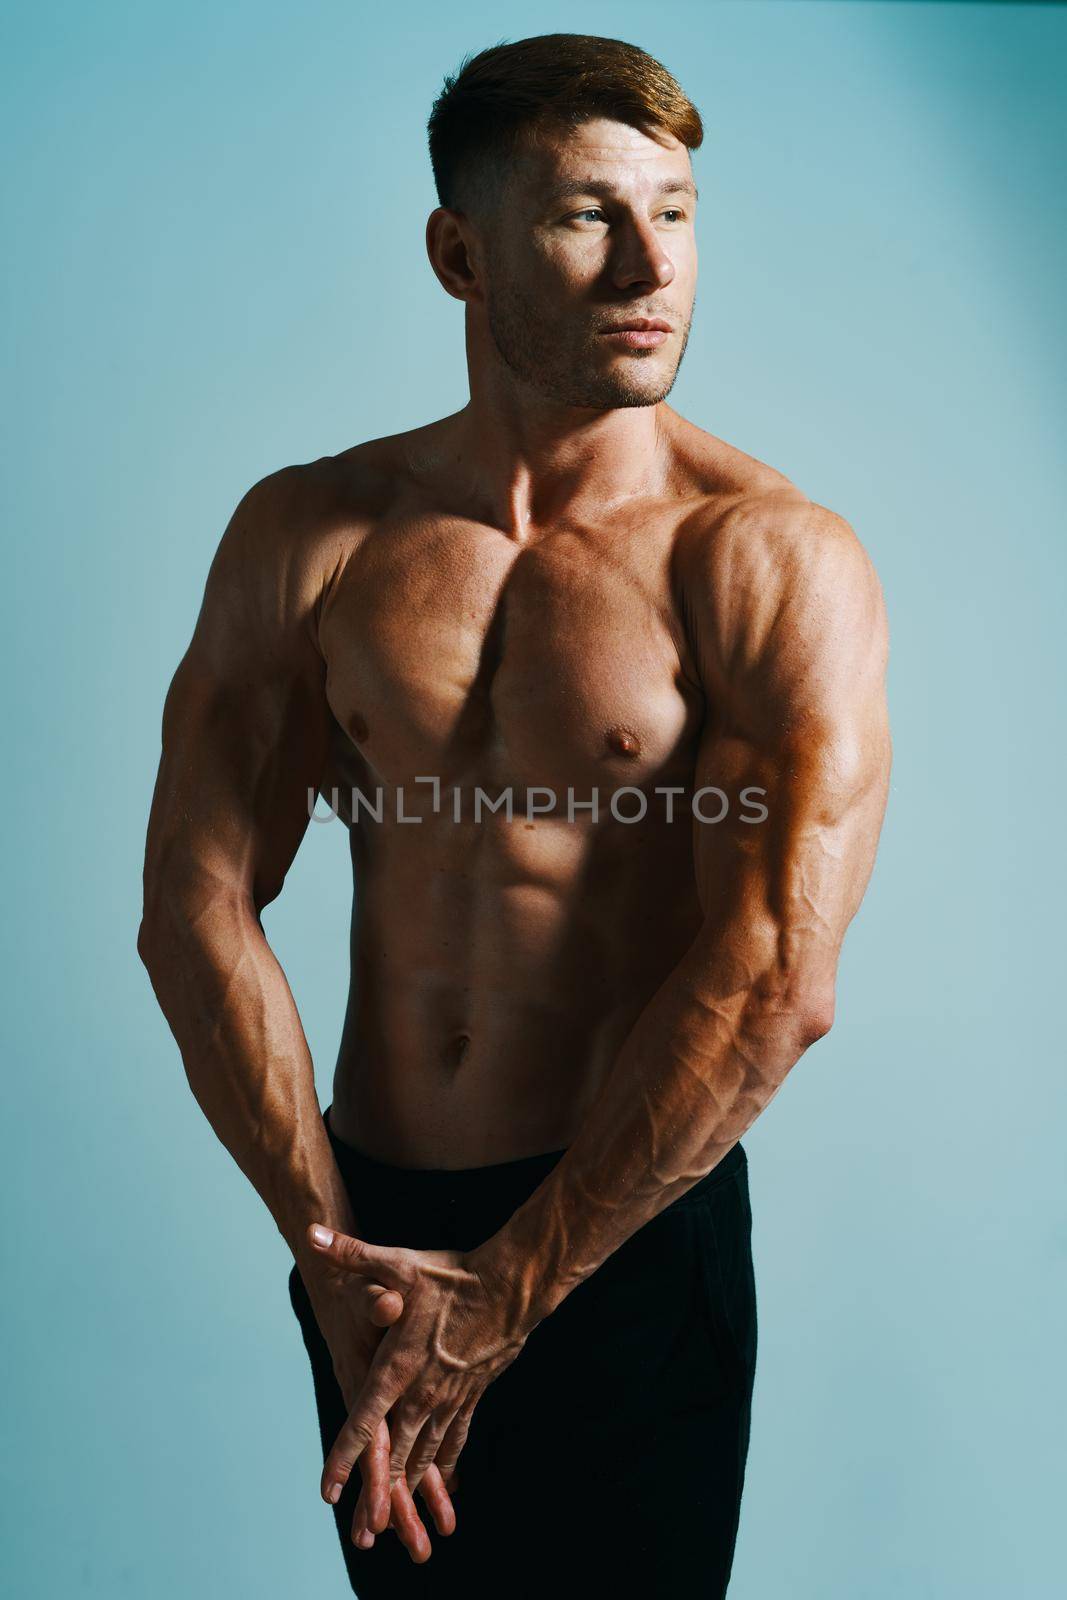 male with bulging topless muscle workout posing bodybuilder. High quality photo